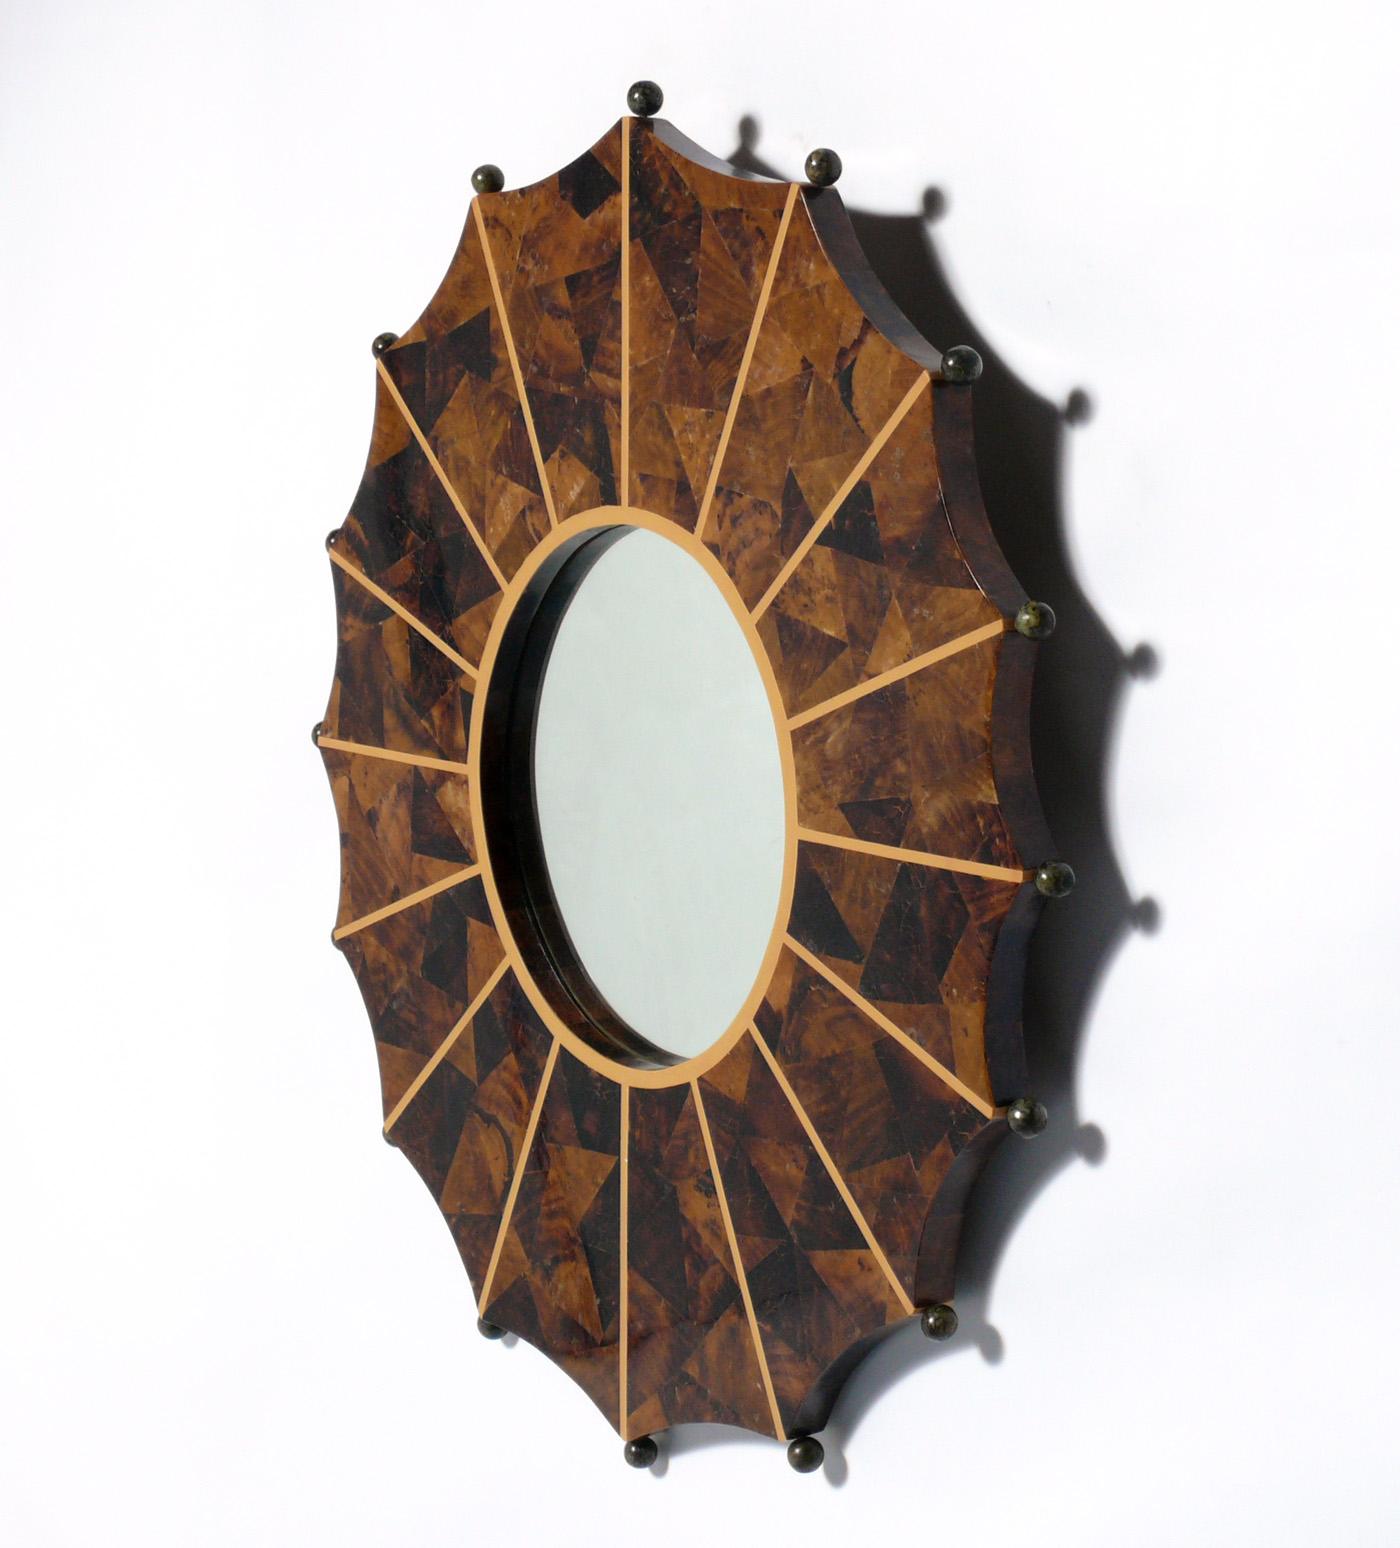 Tessellated shell mirror by R & Y Augousti, French, circa 1990s. Beautiful handmade mirror executed in tessellated lacquered shells. Retains R & Y Augousti tag on back.